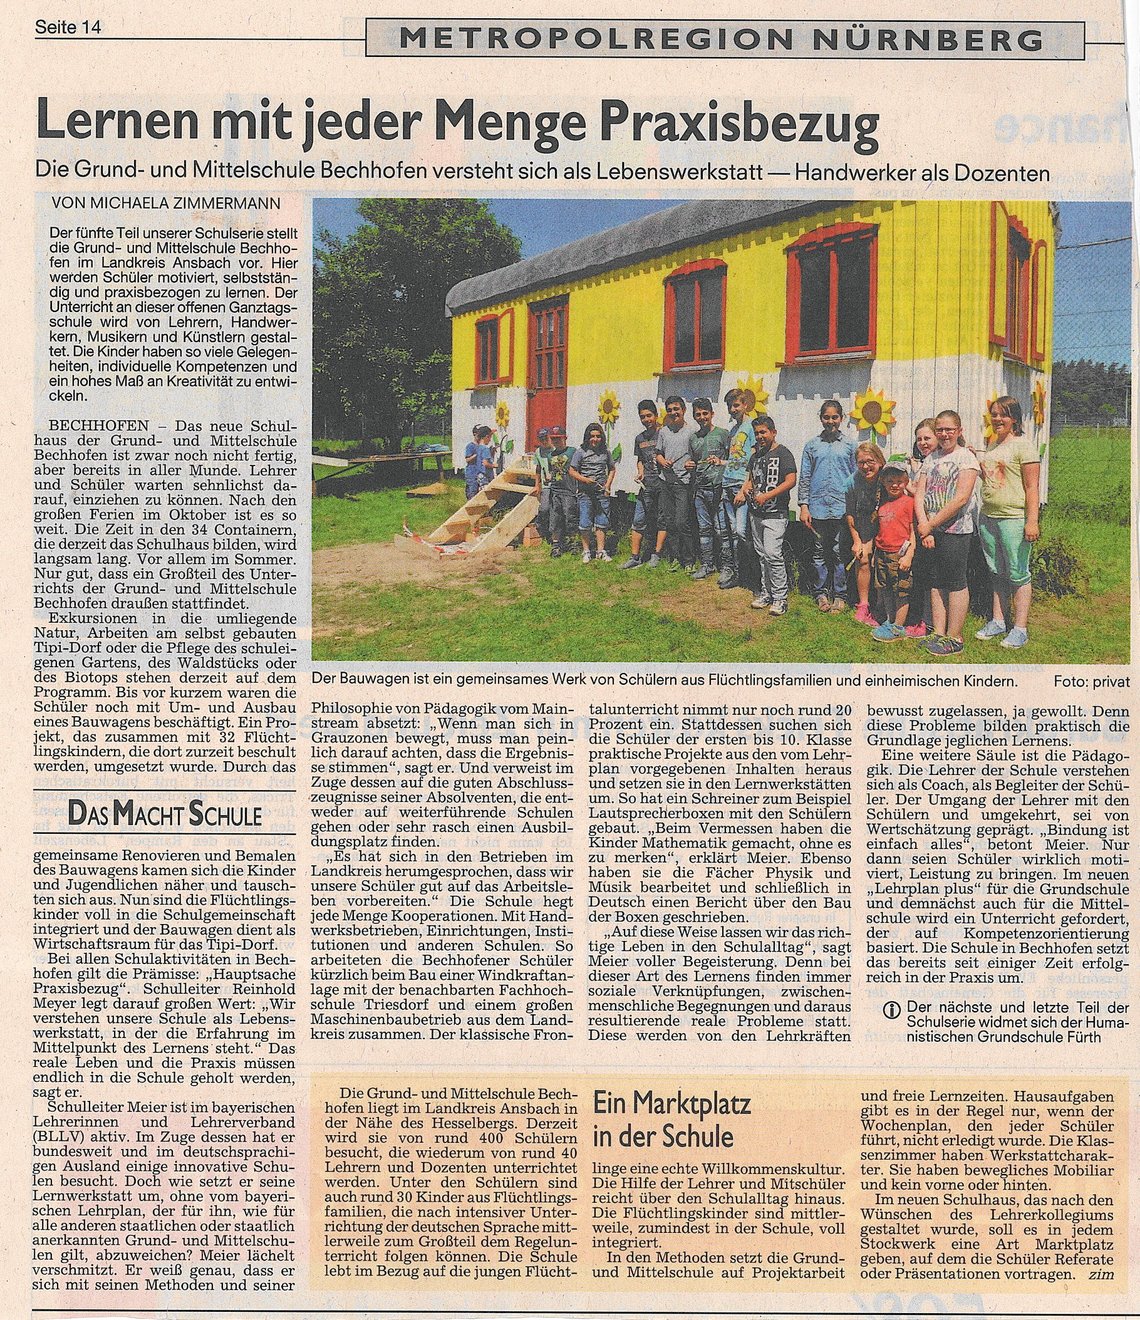 2016: Elementary school Bechhofen: 5.000€ for site trailer project